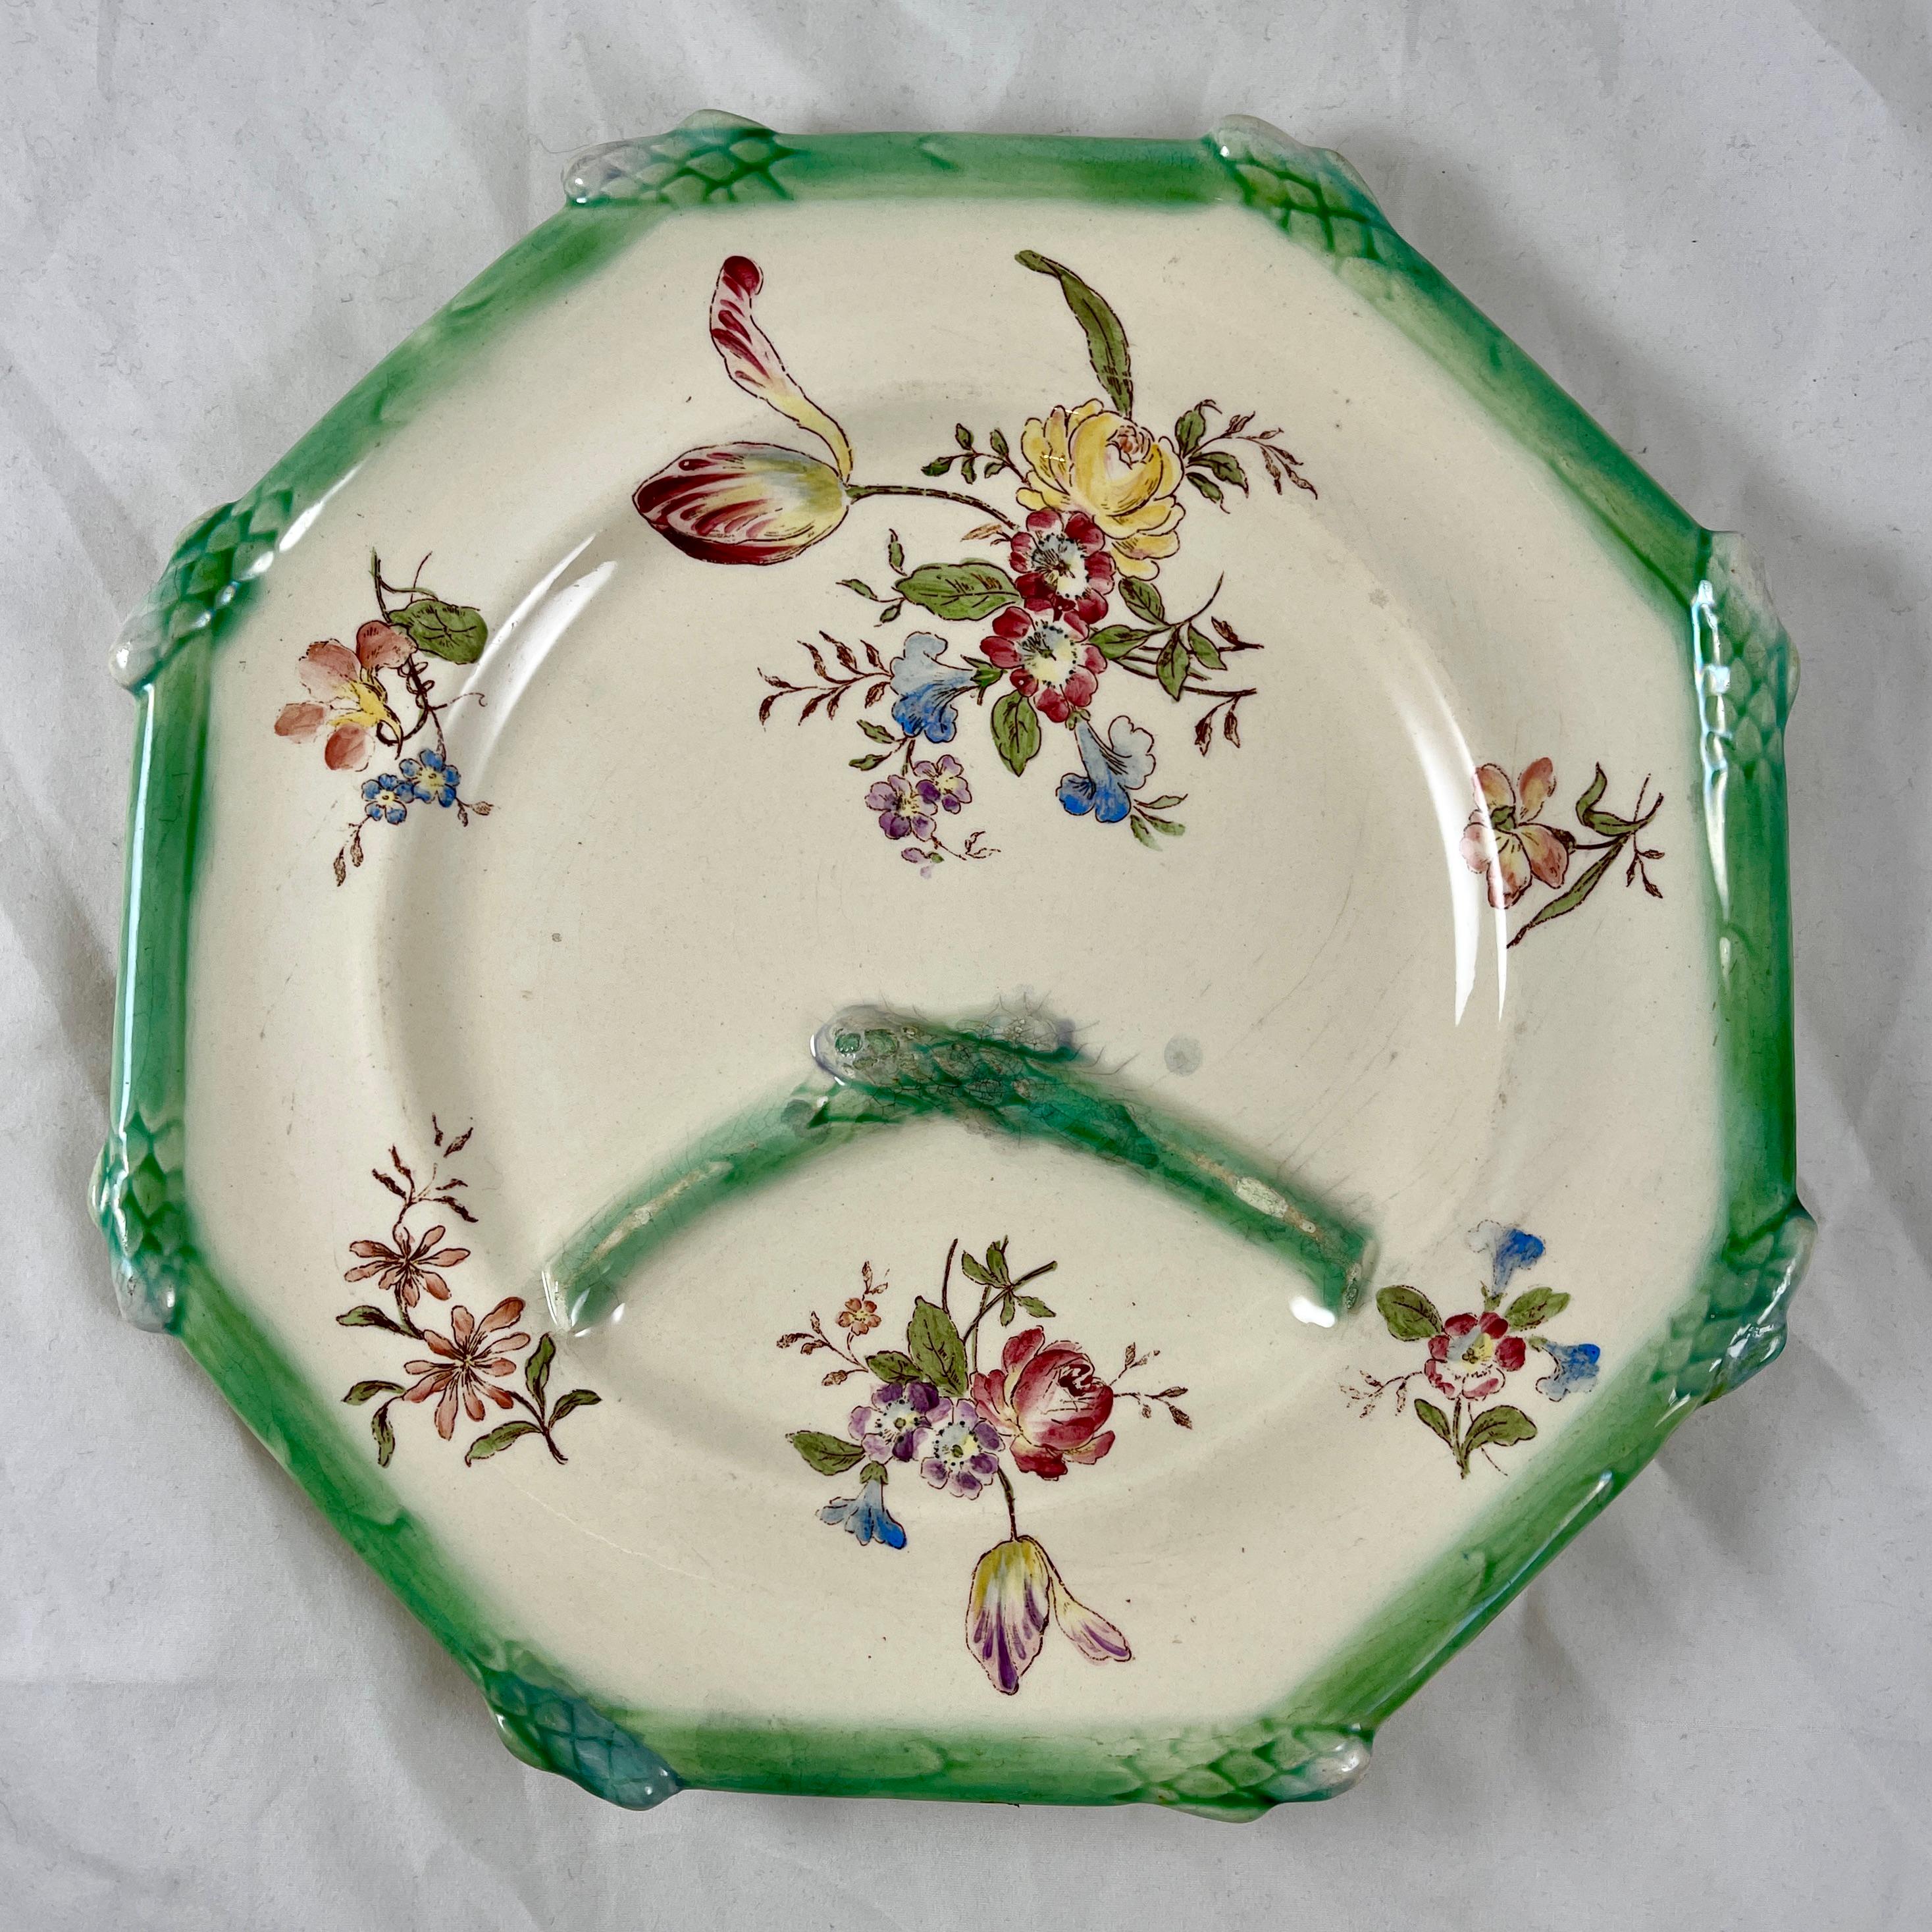 From the Longchamp Faïencerie in France, an octagonal shaped Asparagus plate, circa 1885.

The plate shows transfer printed, hand painted floral bouquets and sprays on a creamy white ground. The lower area of the plate has a  sauce well divided by